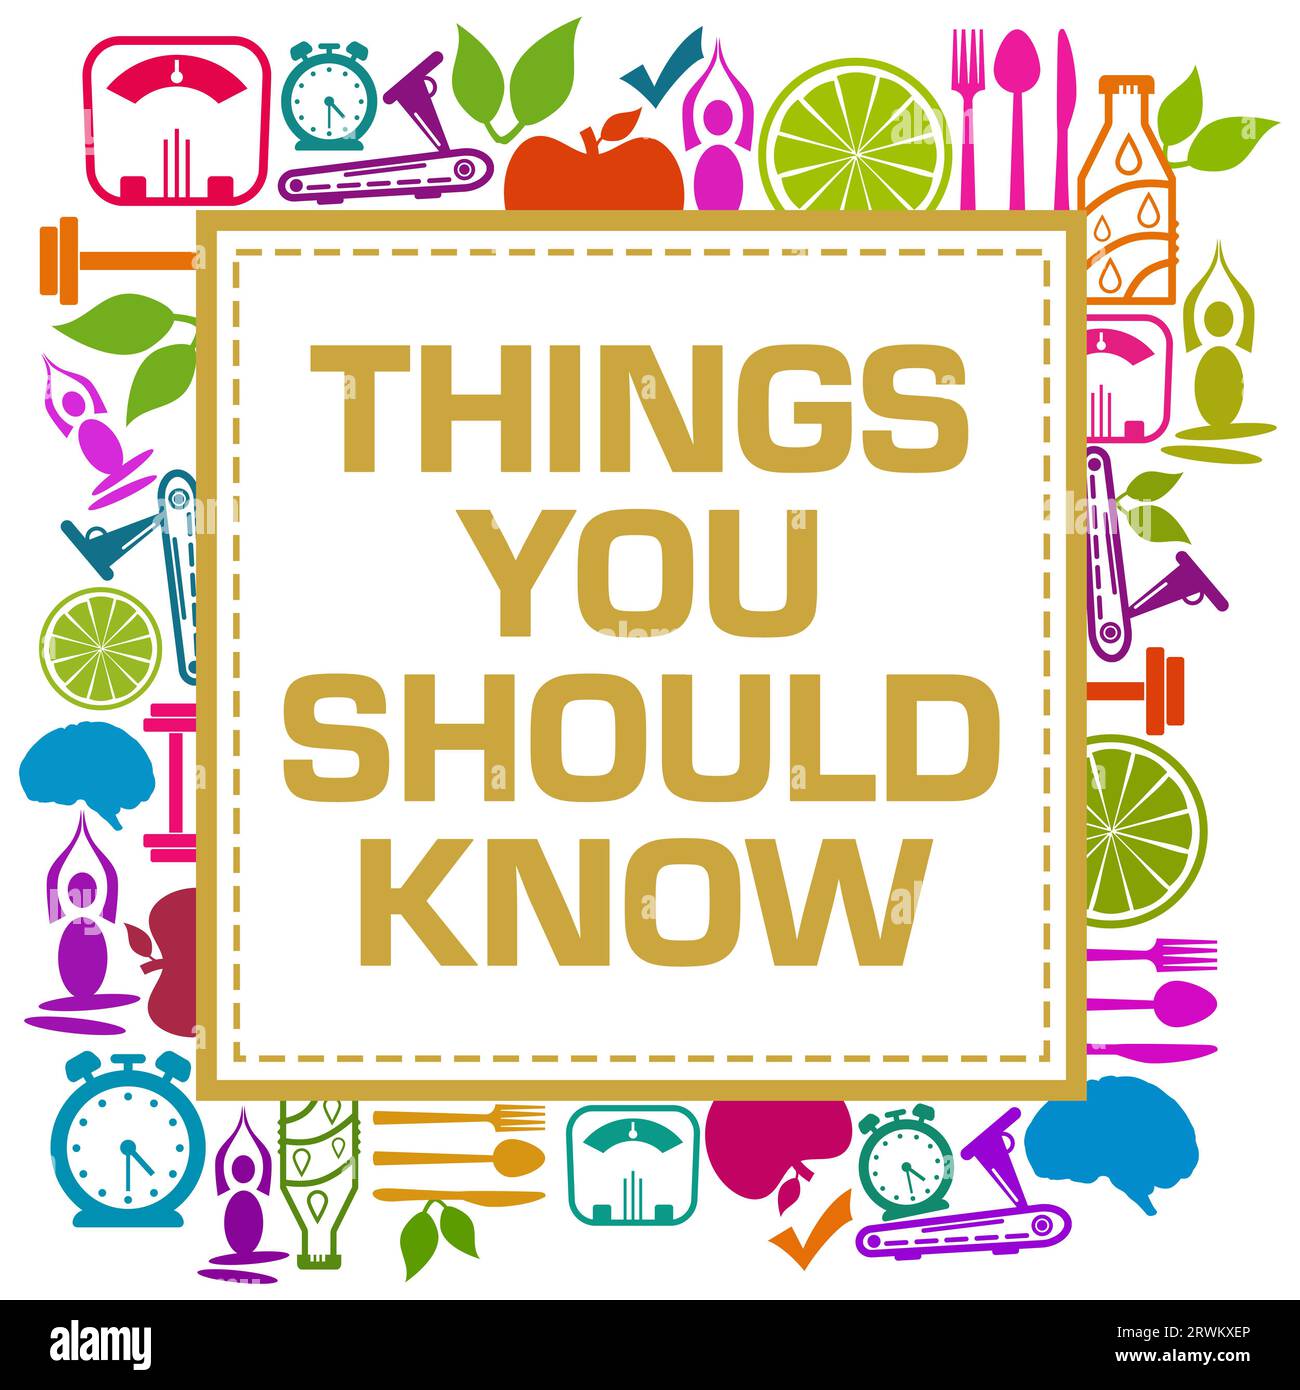 Things You Should Know Colorful Health Symbols Square Text Stock Photo